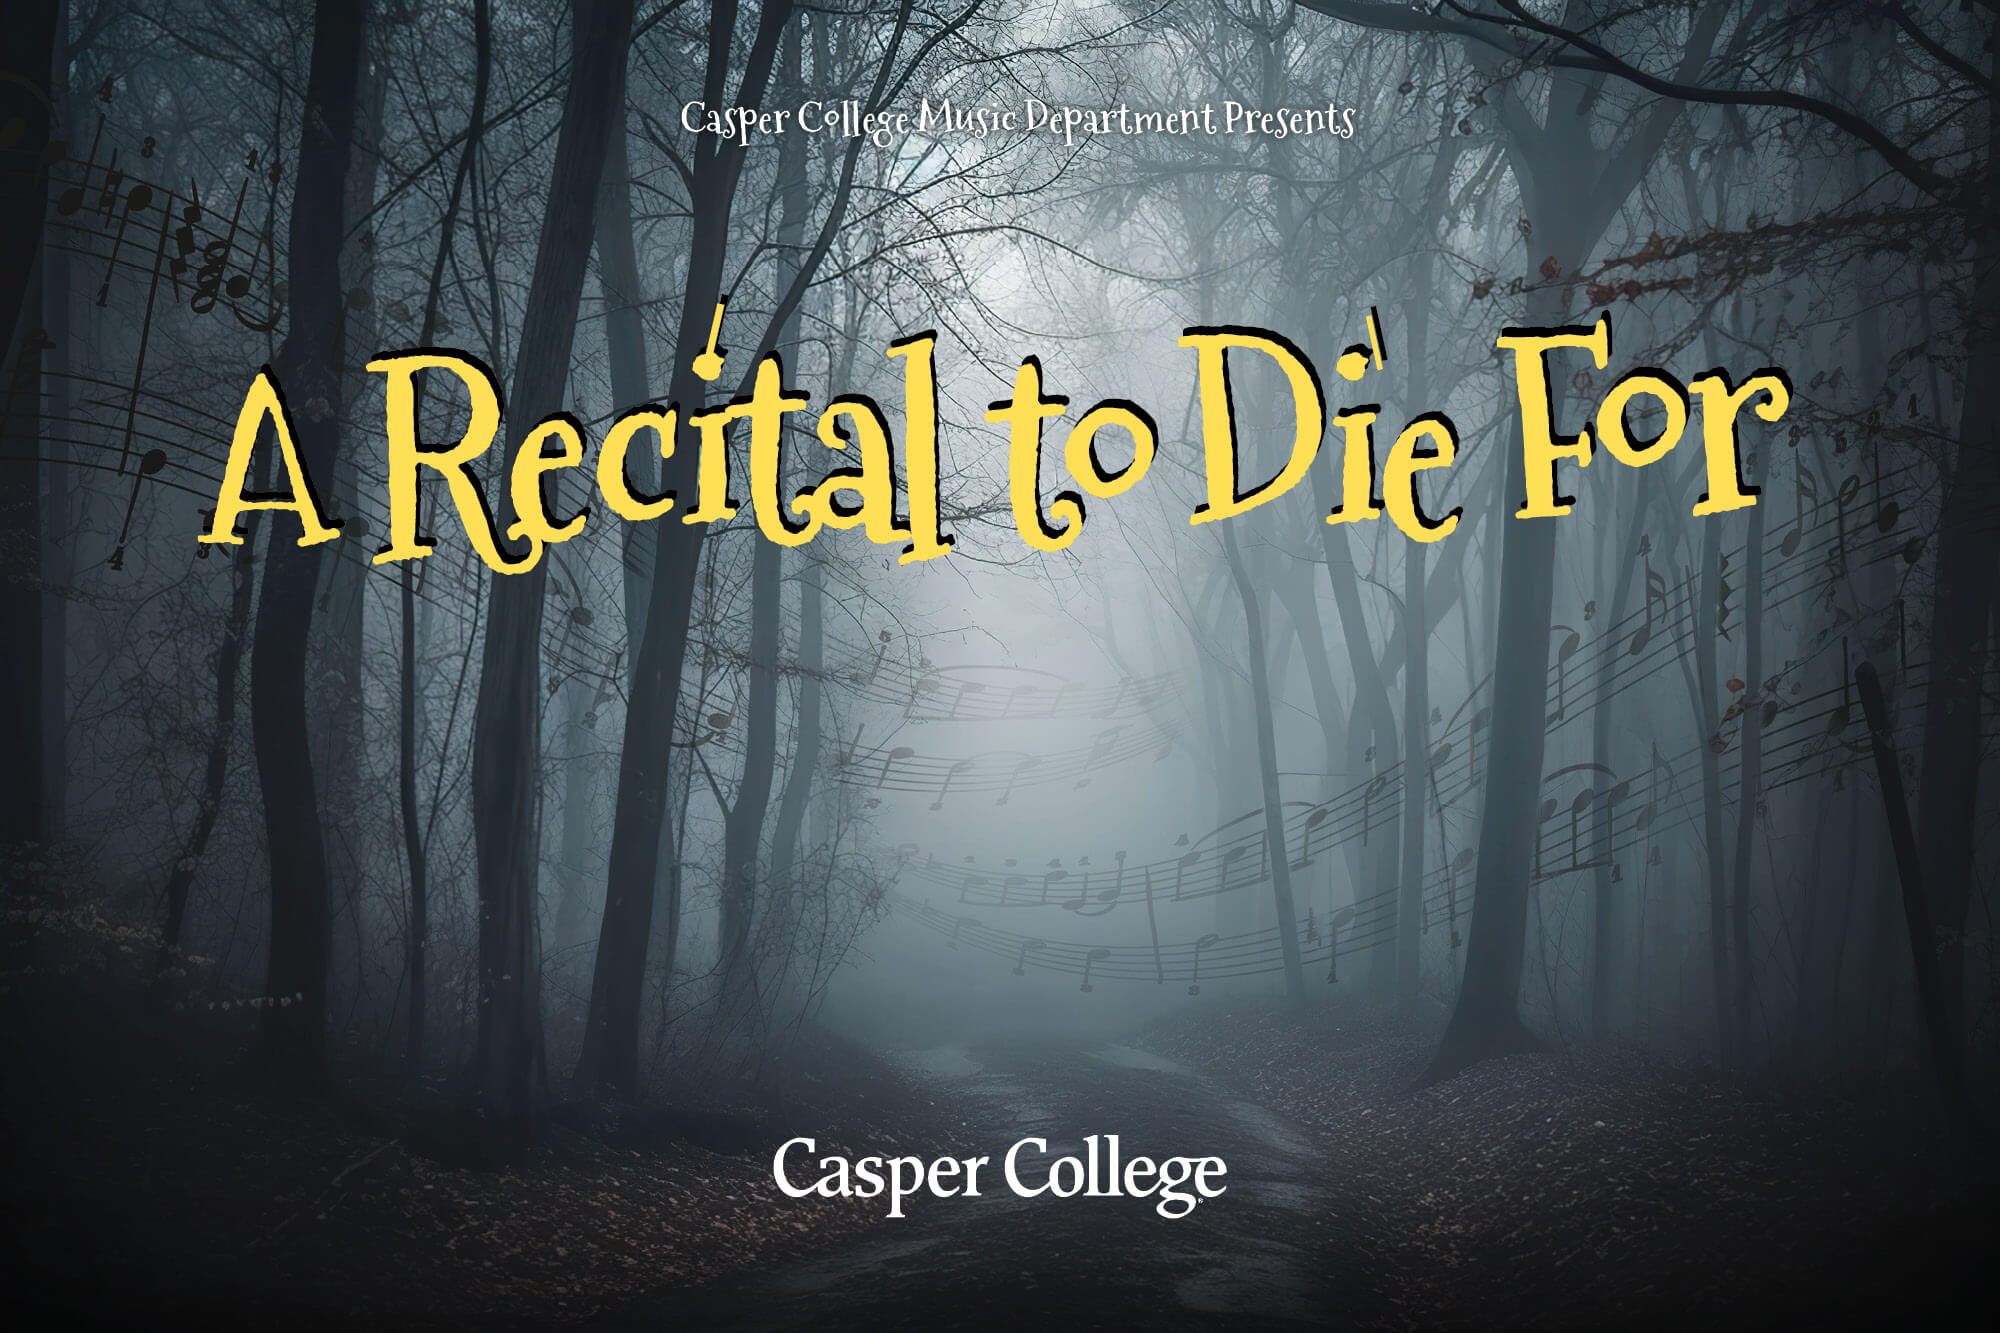 Image for "A Recital to Die For" press release.